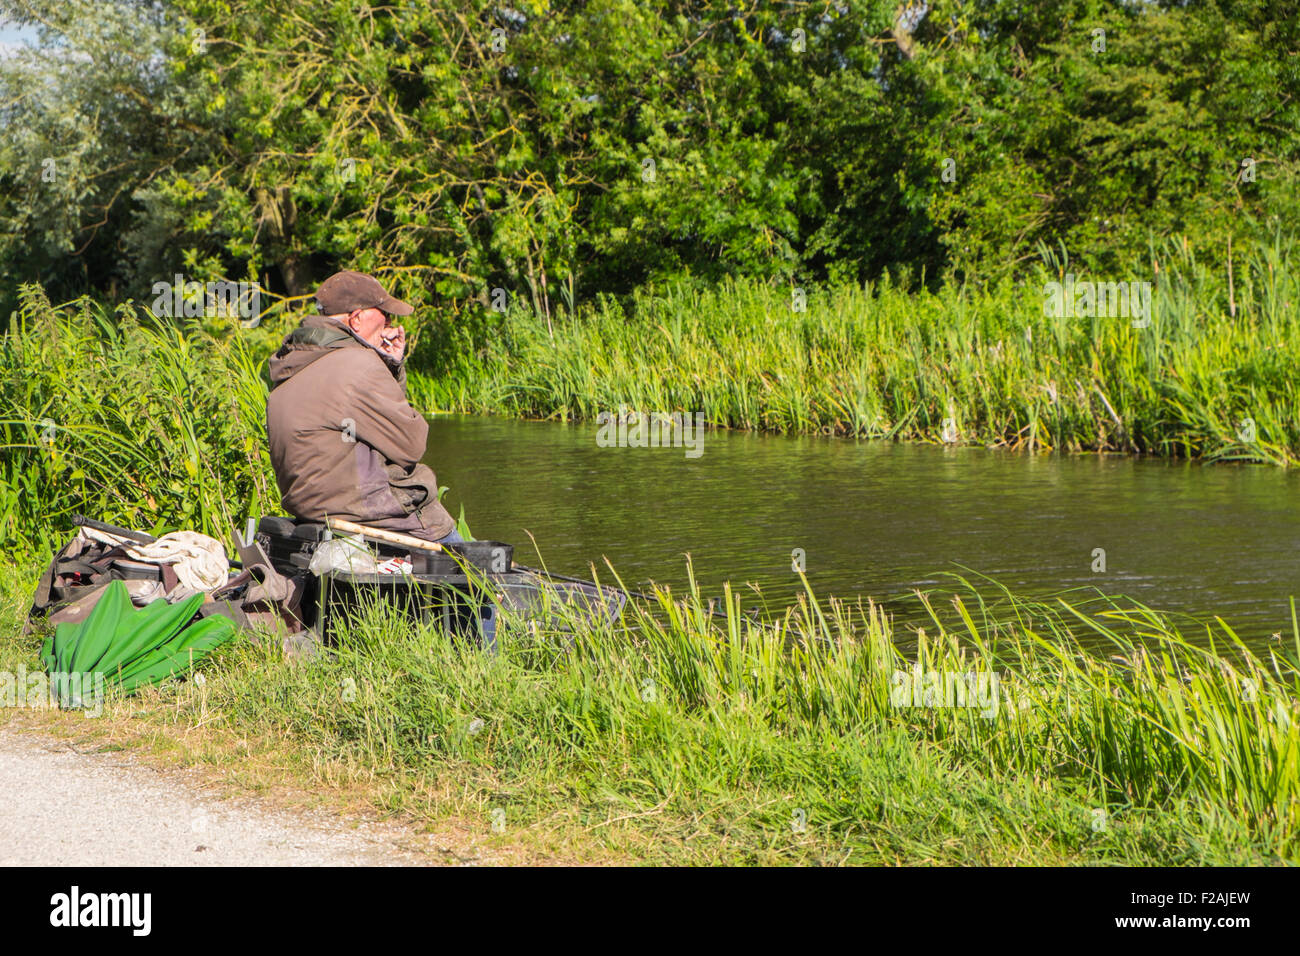 Fisherman, coarse fishing with equipment on the bank of Grantham canal, Hickling, Nottinghamshire. UK Stock Photo